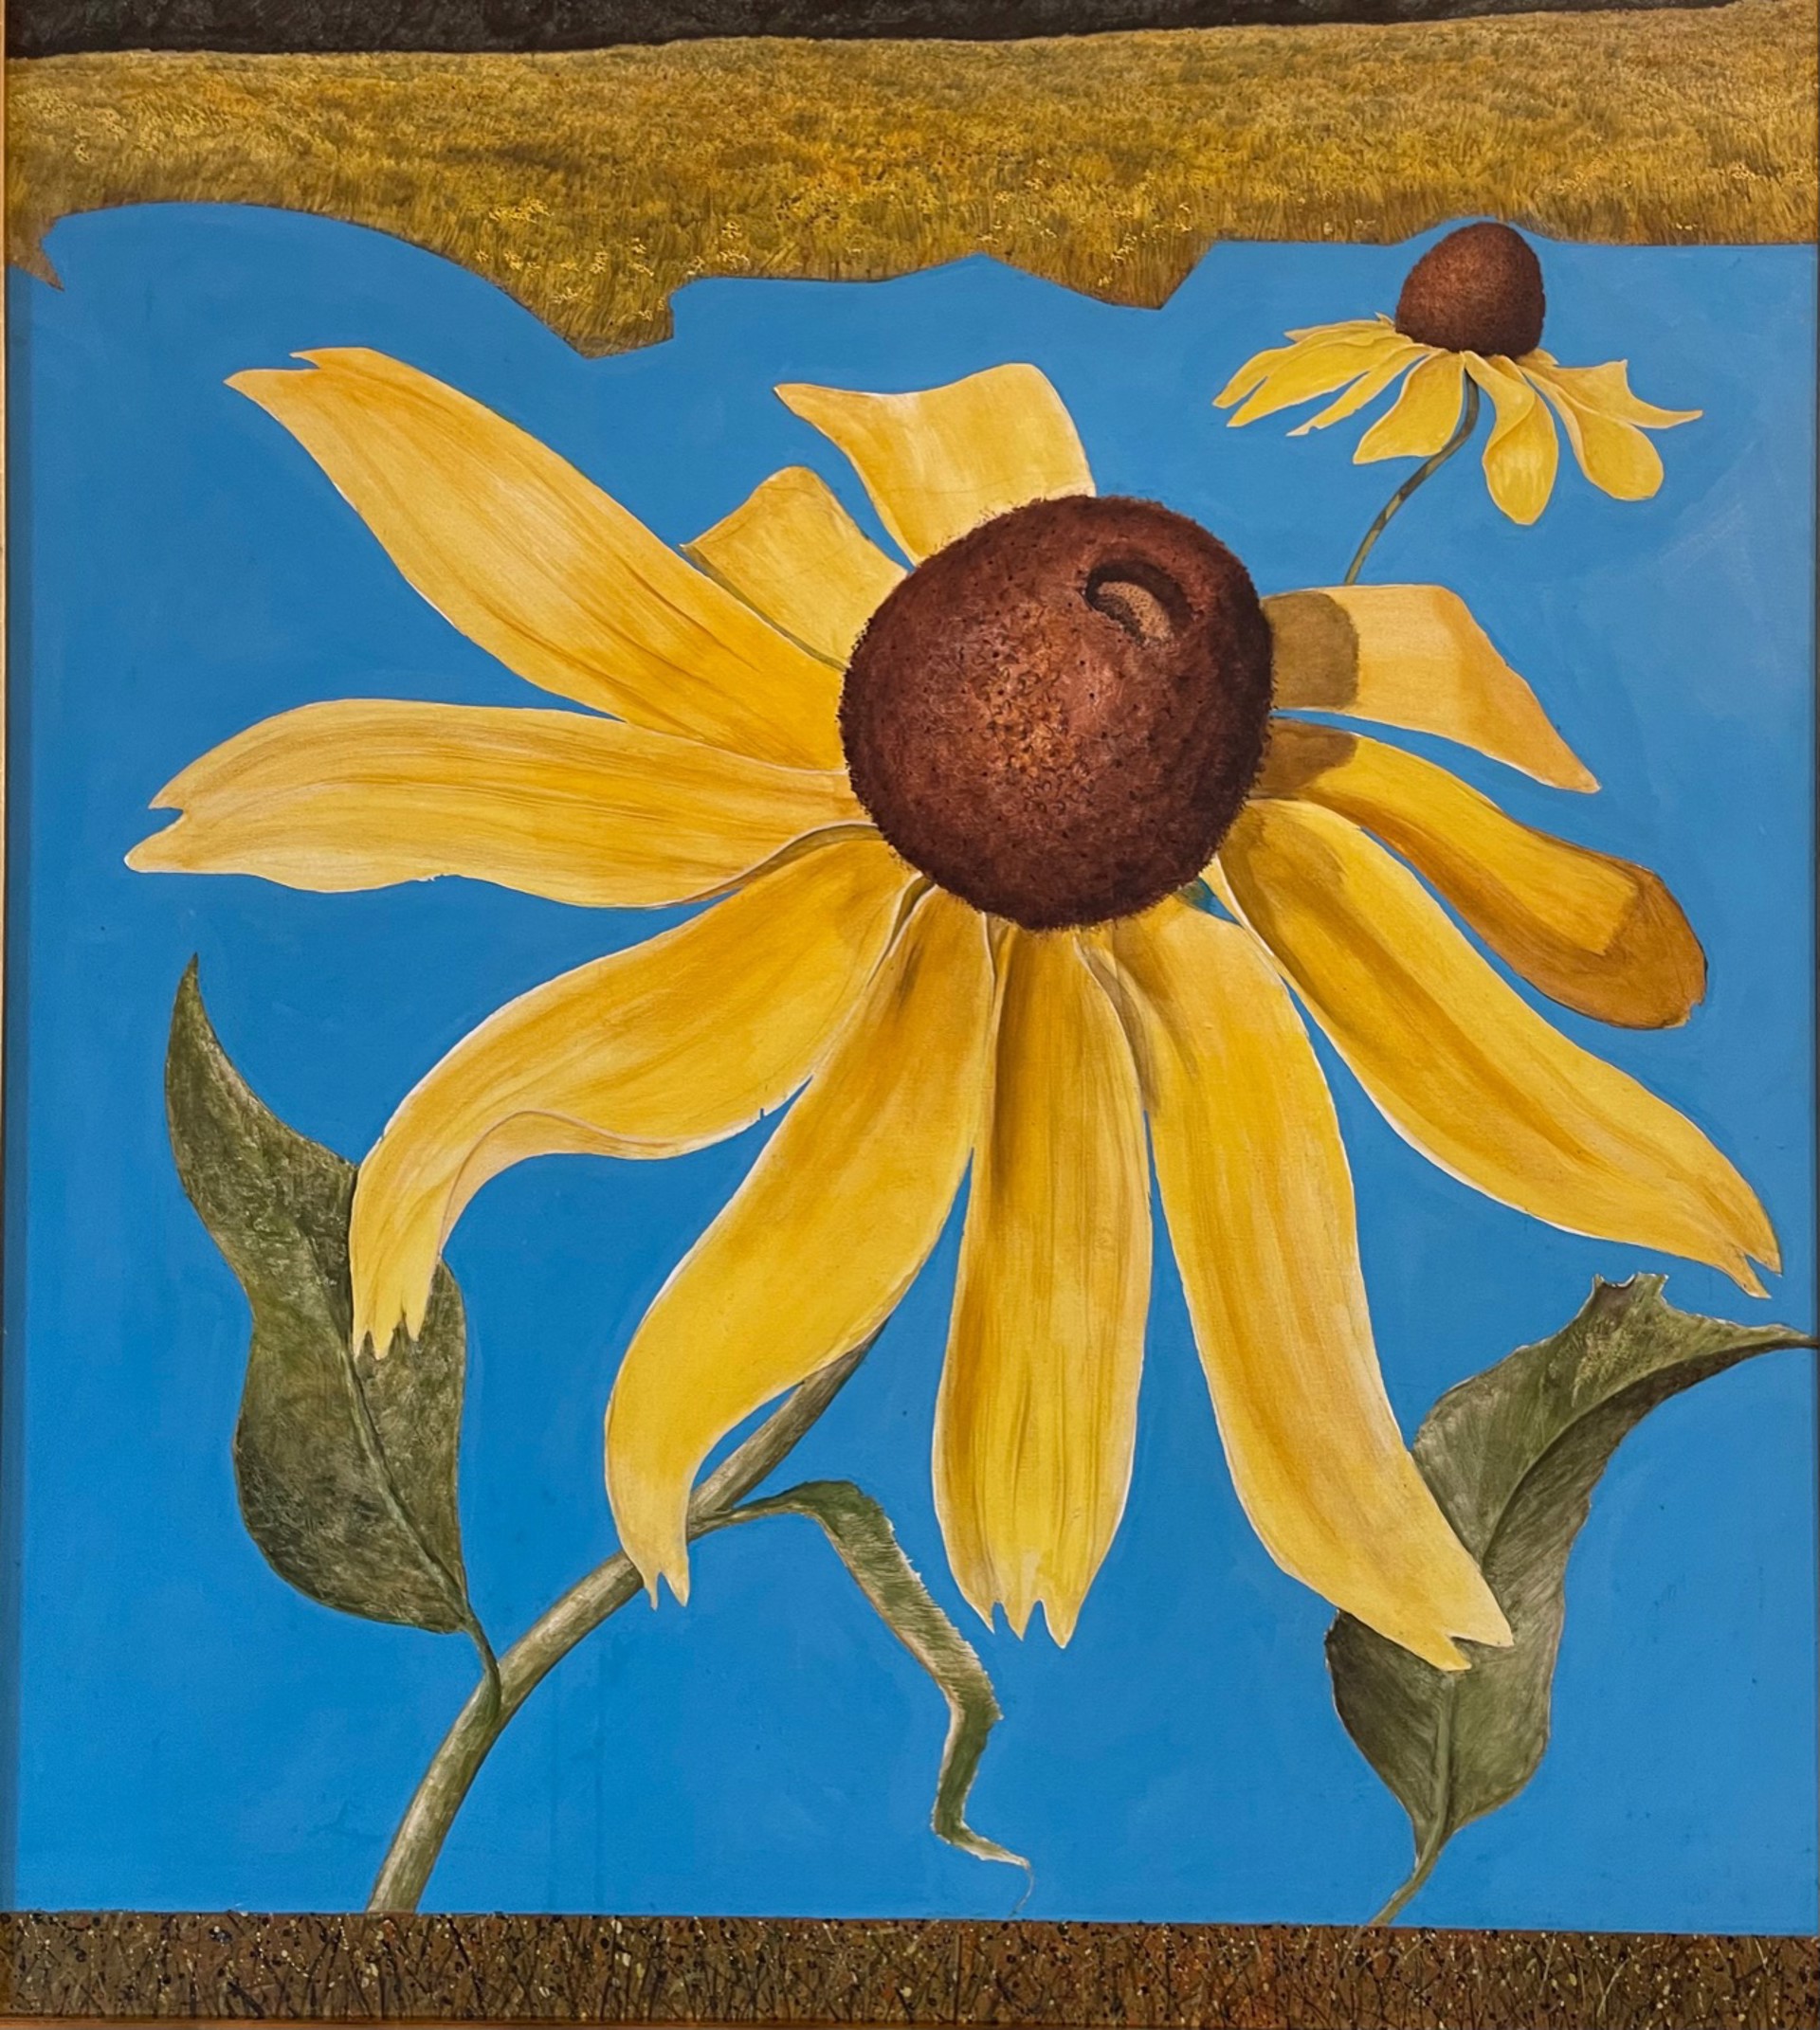 Brown Eyed Susan by William A. Whiteside